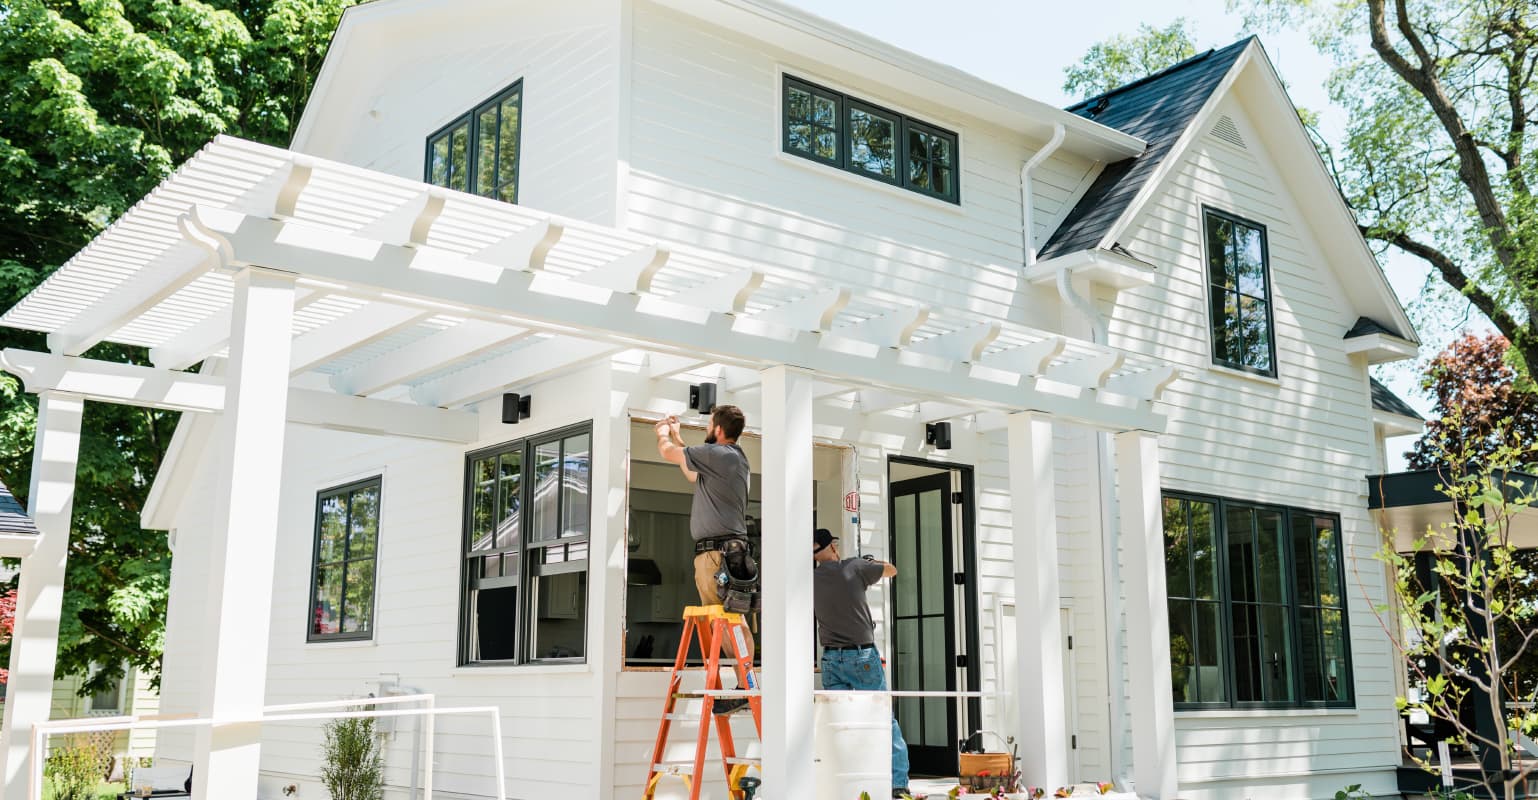 A white modern farmhouse with large windows and a covered porch supported by square columns. A person on an orange ladder is working on the porch's structure, possibly painting or installing trim. The house is surrounded by lush greenery under a bright blue sky.